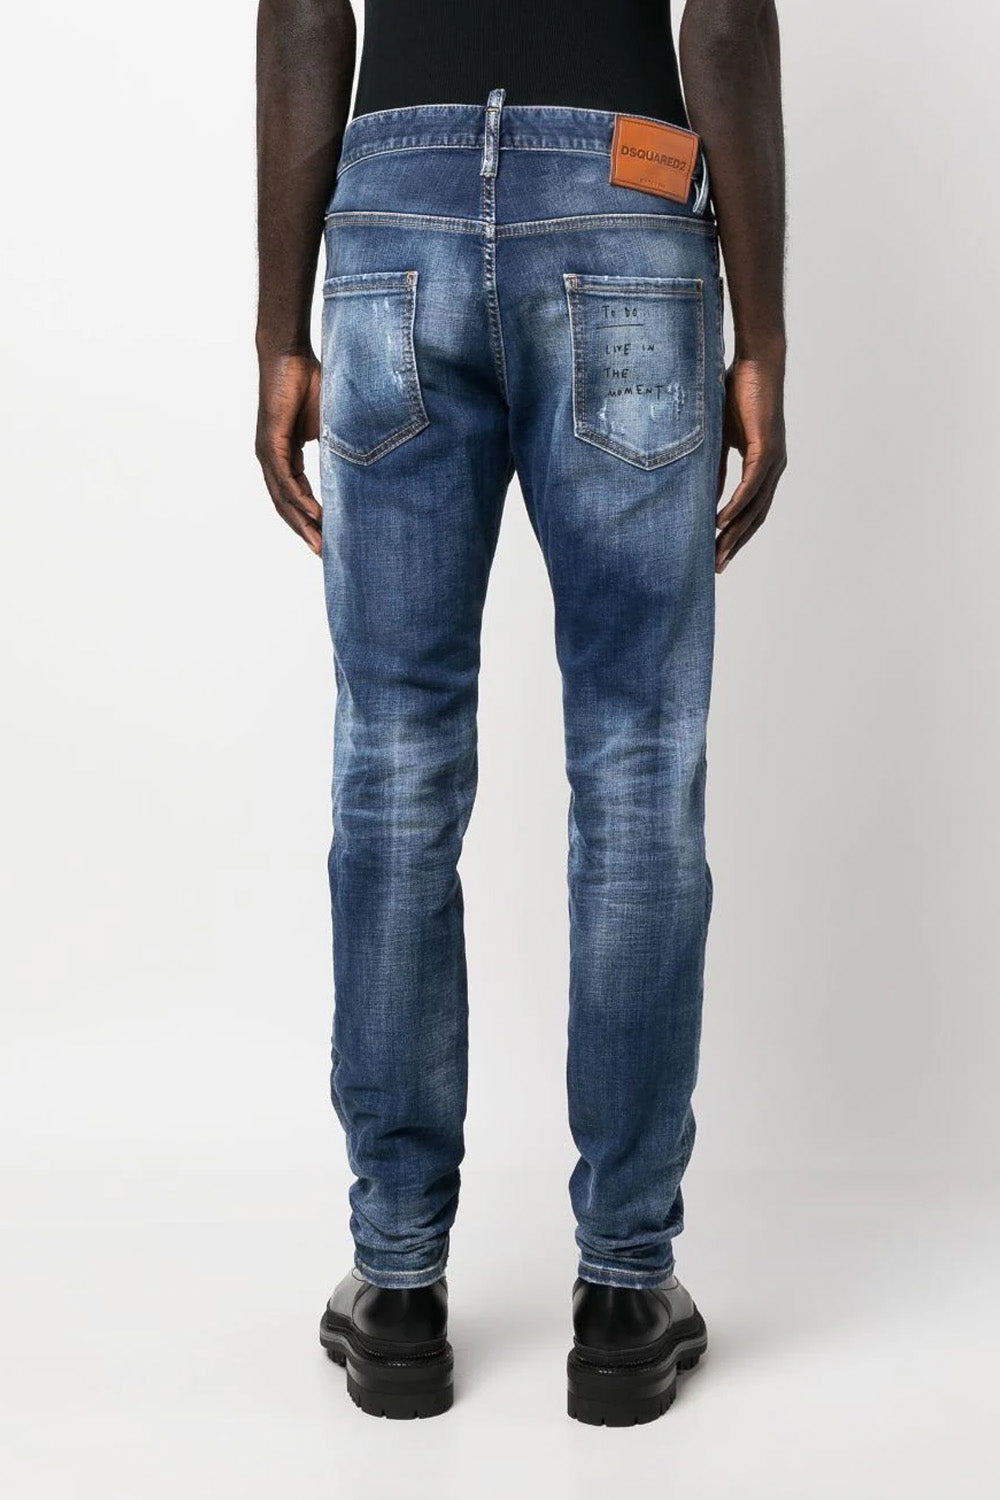 Dsquared2 slim-fit distressed-finish jeans